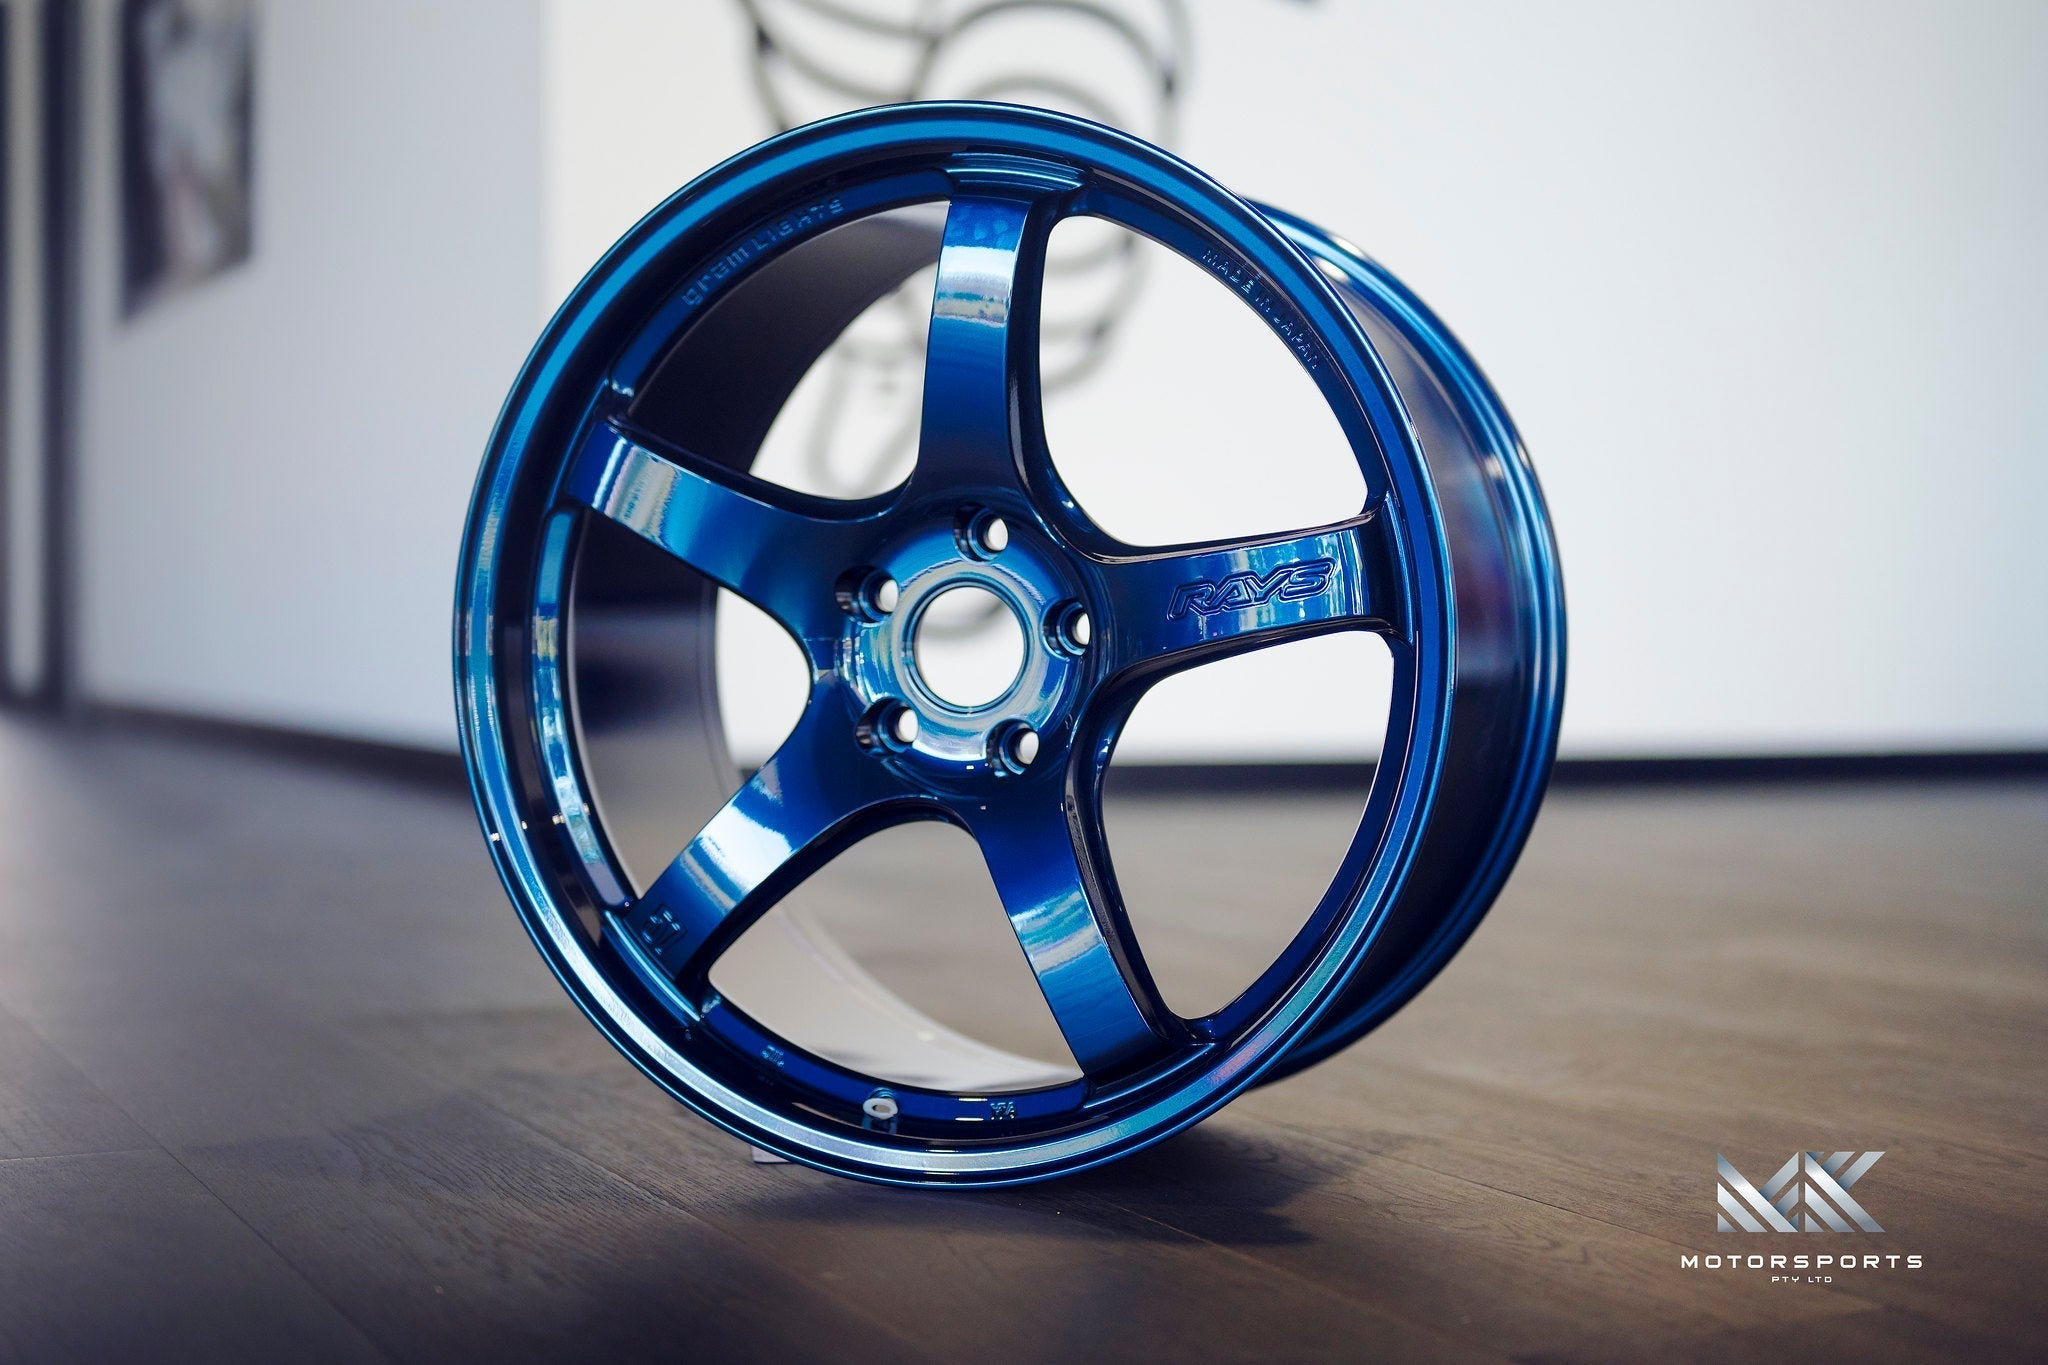 gramLIGHTS 57CR 19" - Premium Wheels from Gram Lights - From just $550.0! Shop now at MK MOTORSPORTS